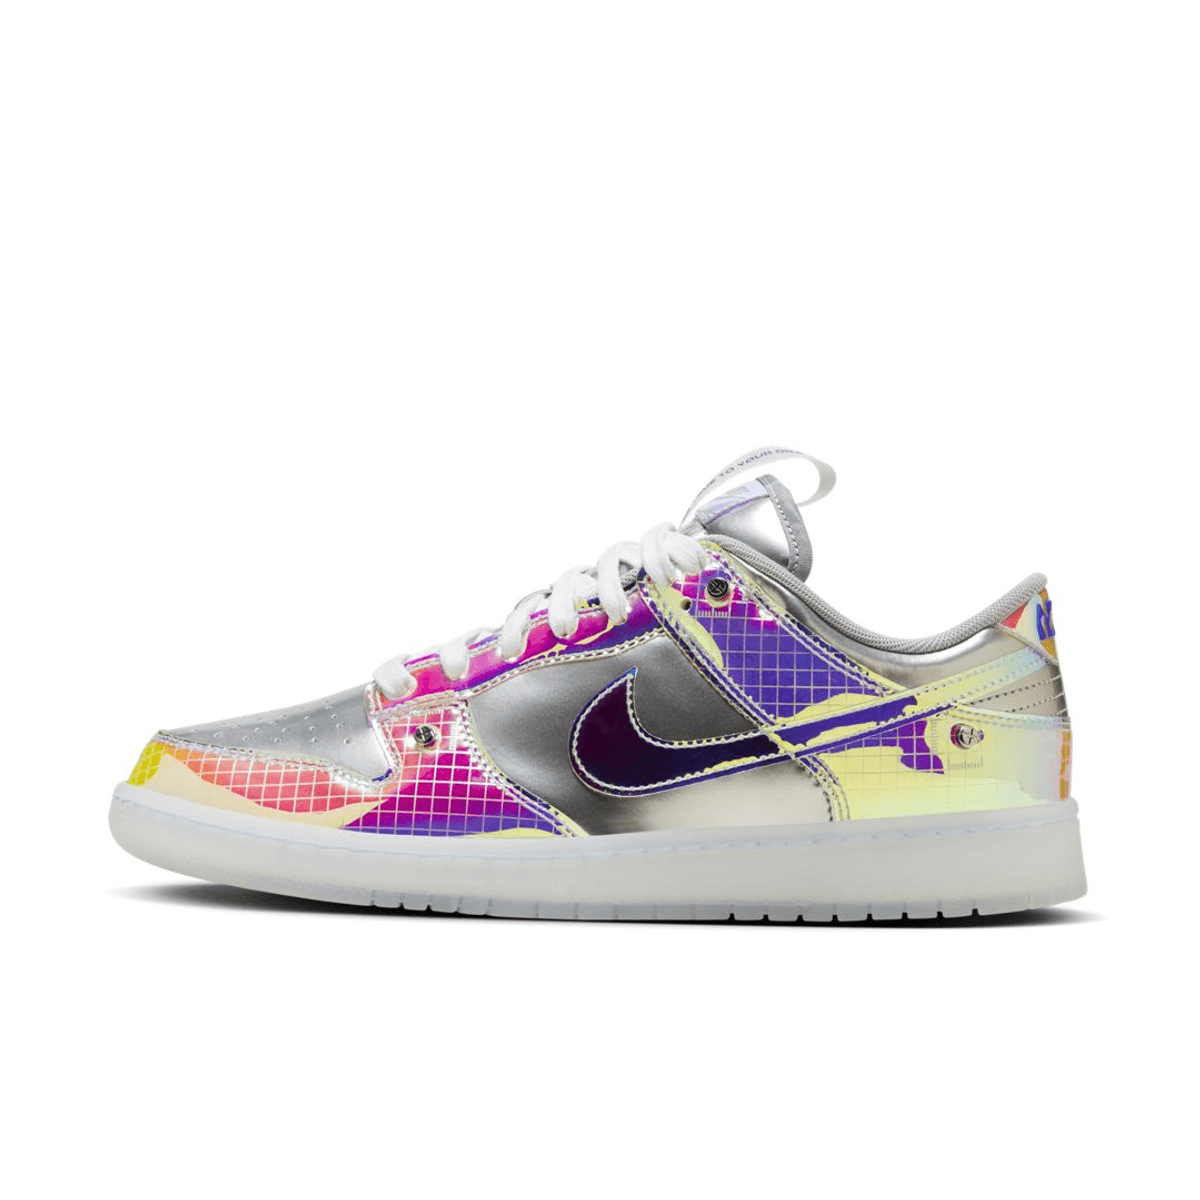 Official Images Of The 2023 Nike Dunk Low "Be True"